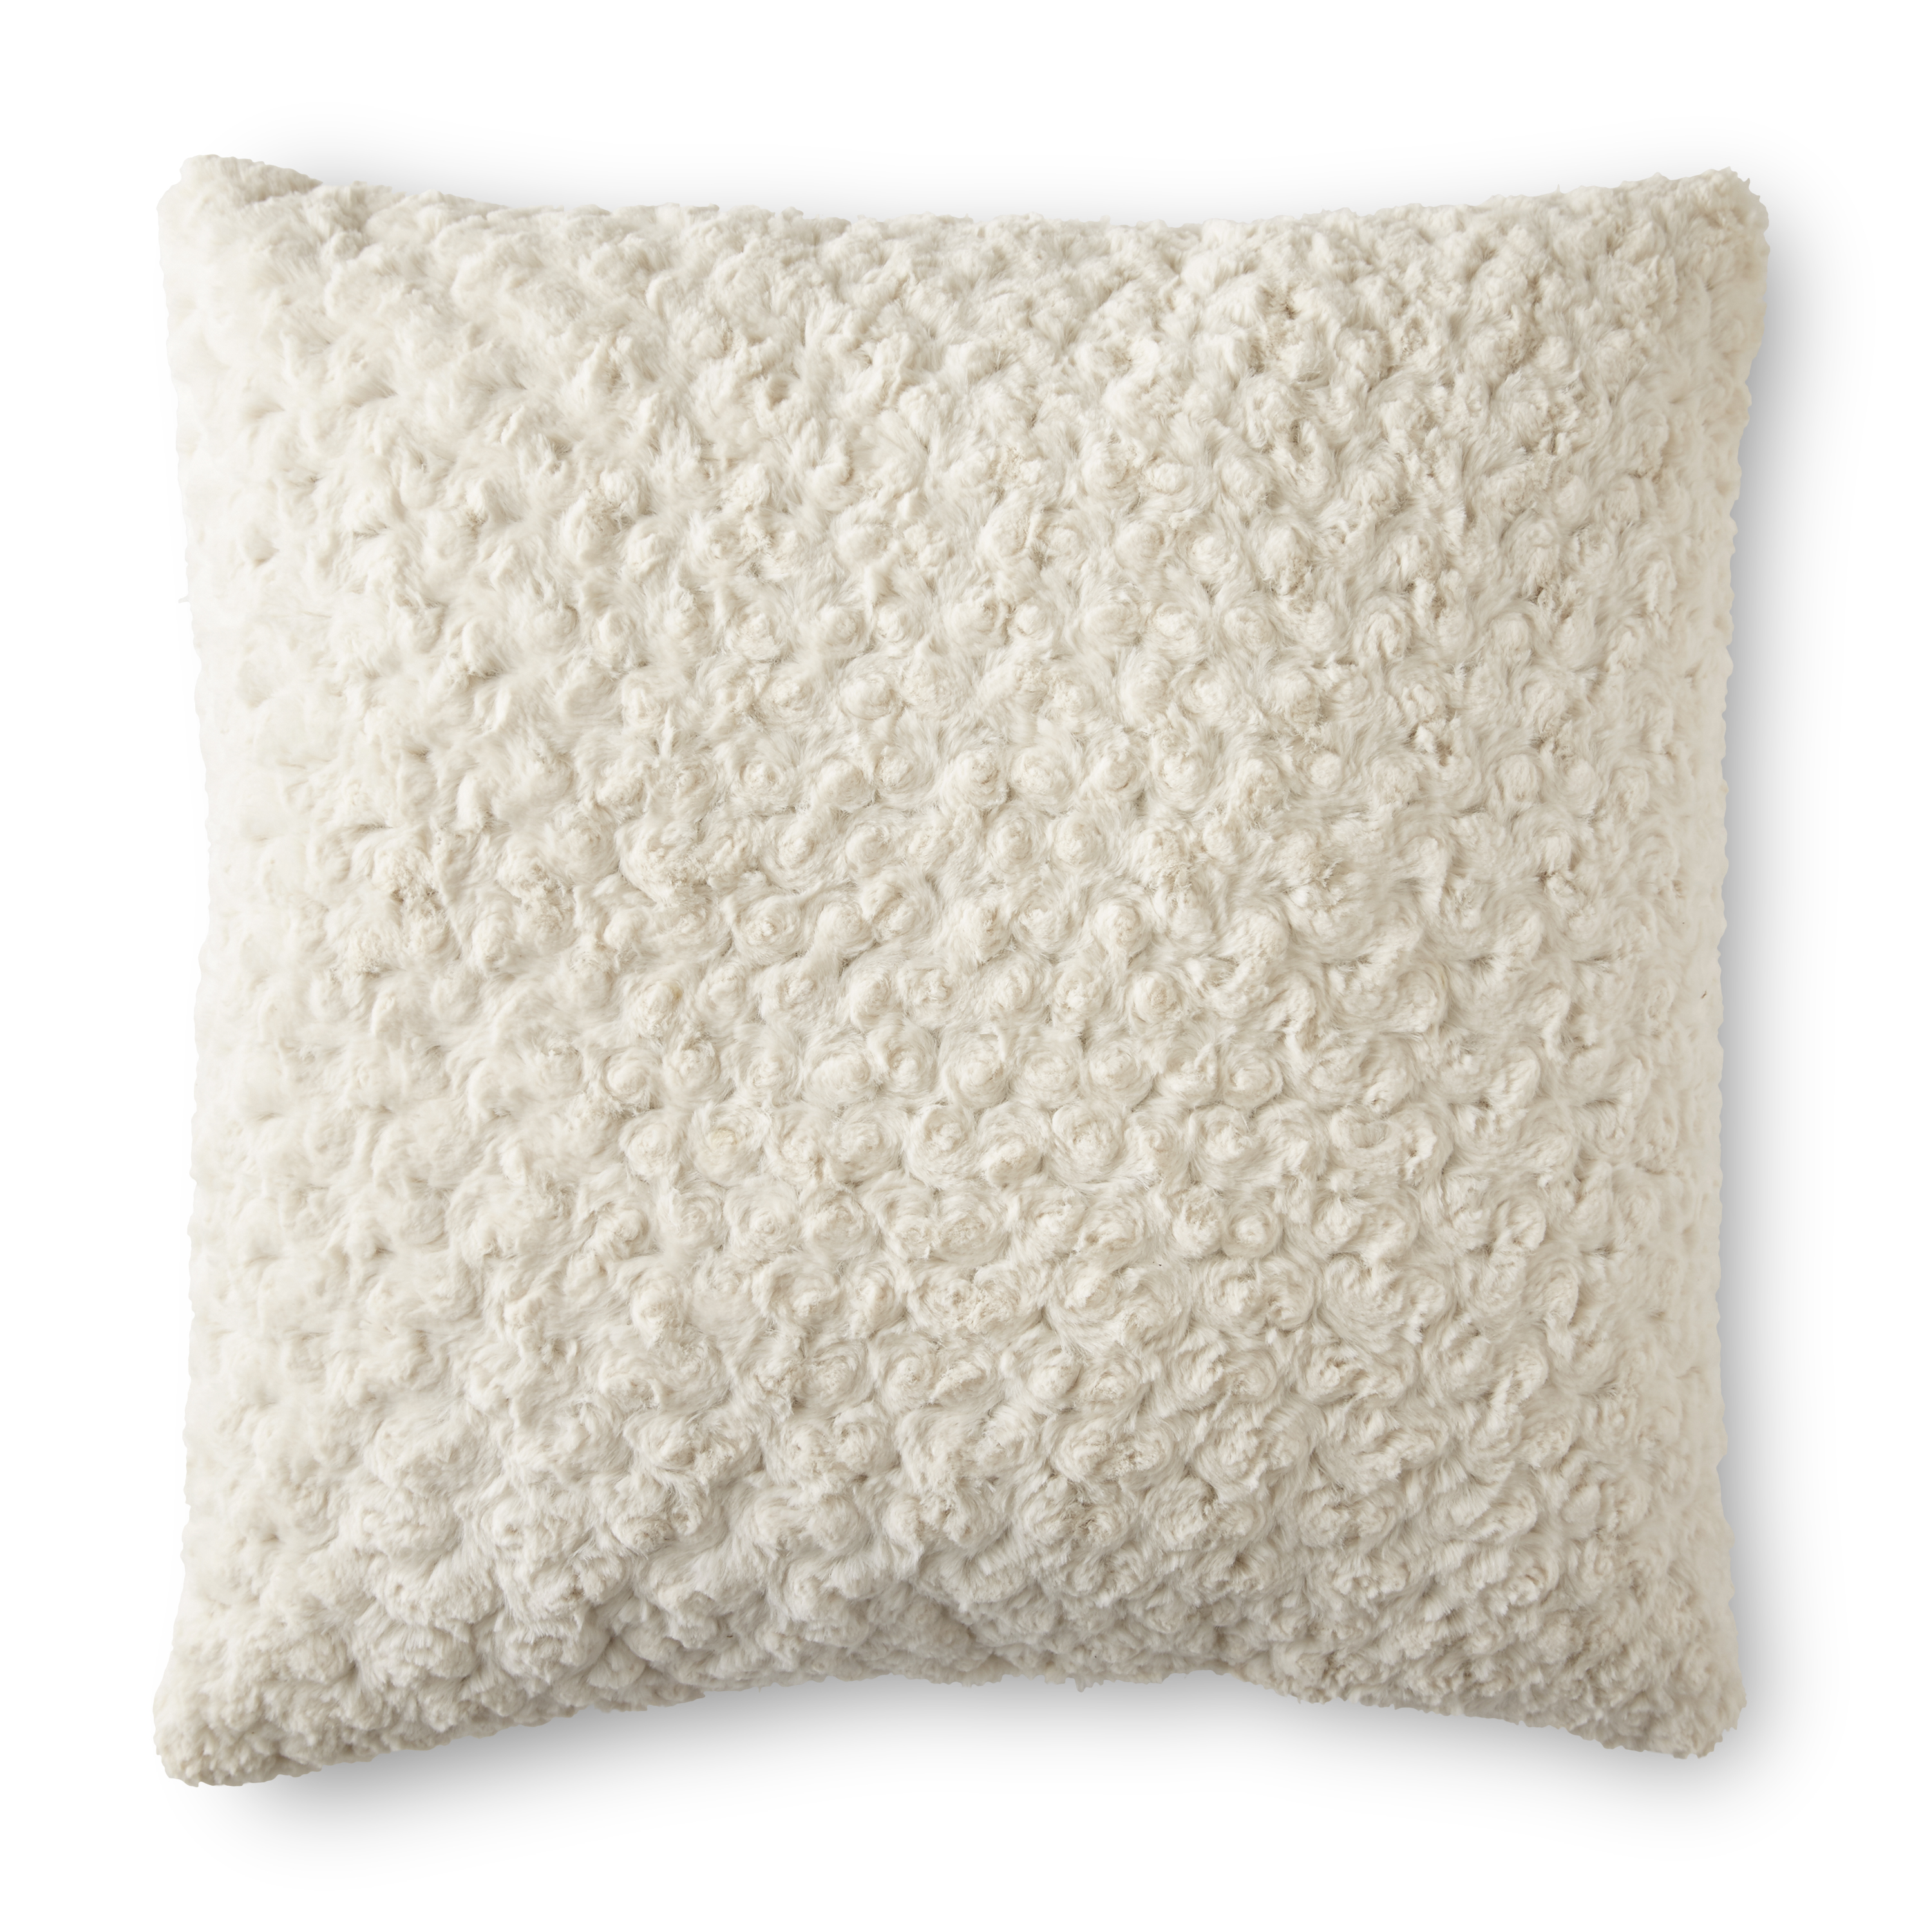 Mainstays Rosette Plush Decorative Square Throw Pillow, 22" x 22", Ivory Color - image 1 of 4